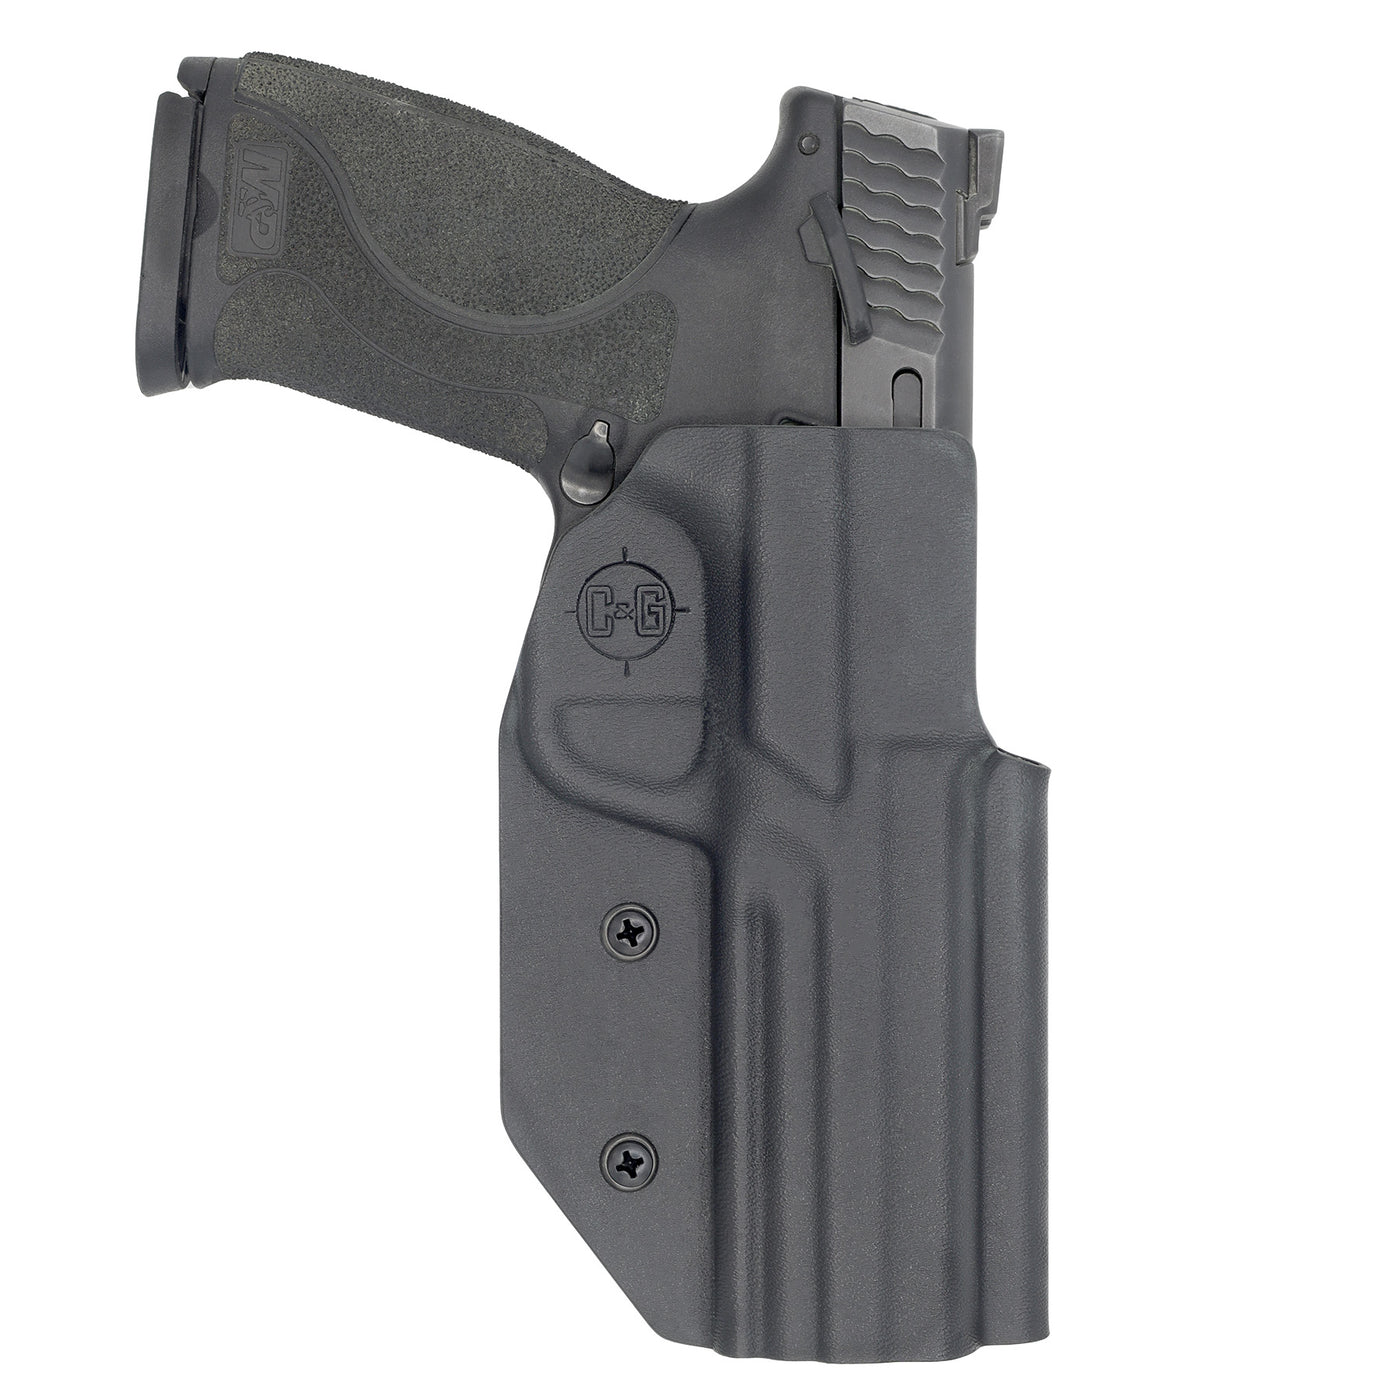 C&G Holsters quickship COMPETITION kydex holster M&P 9/40